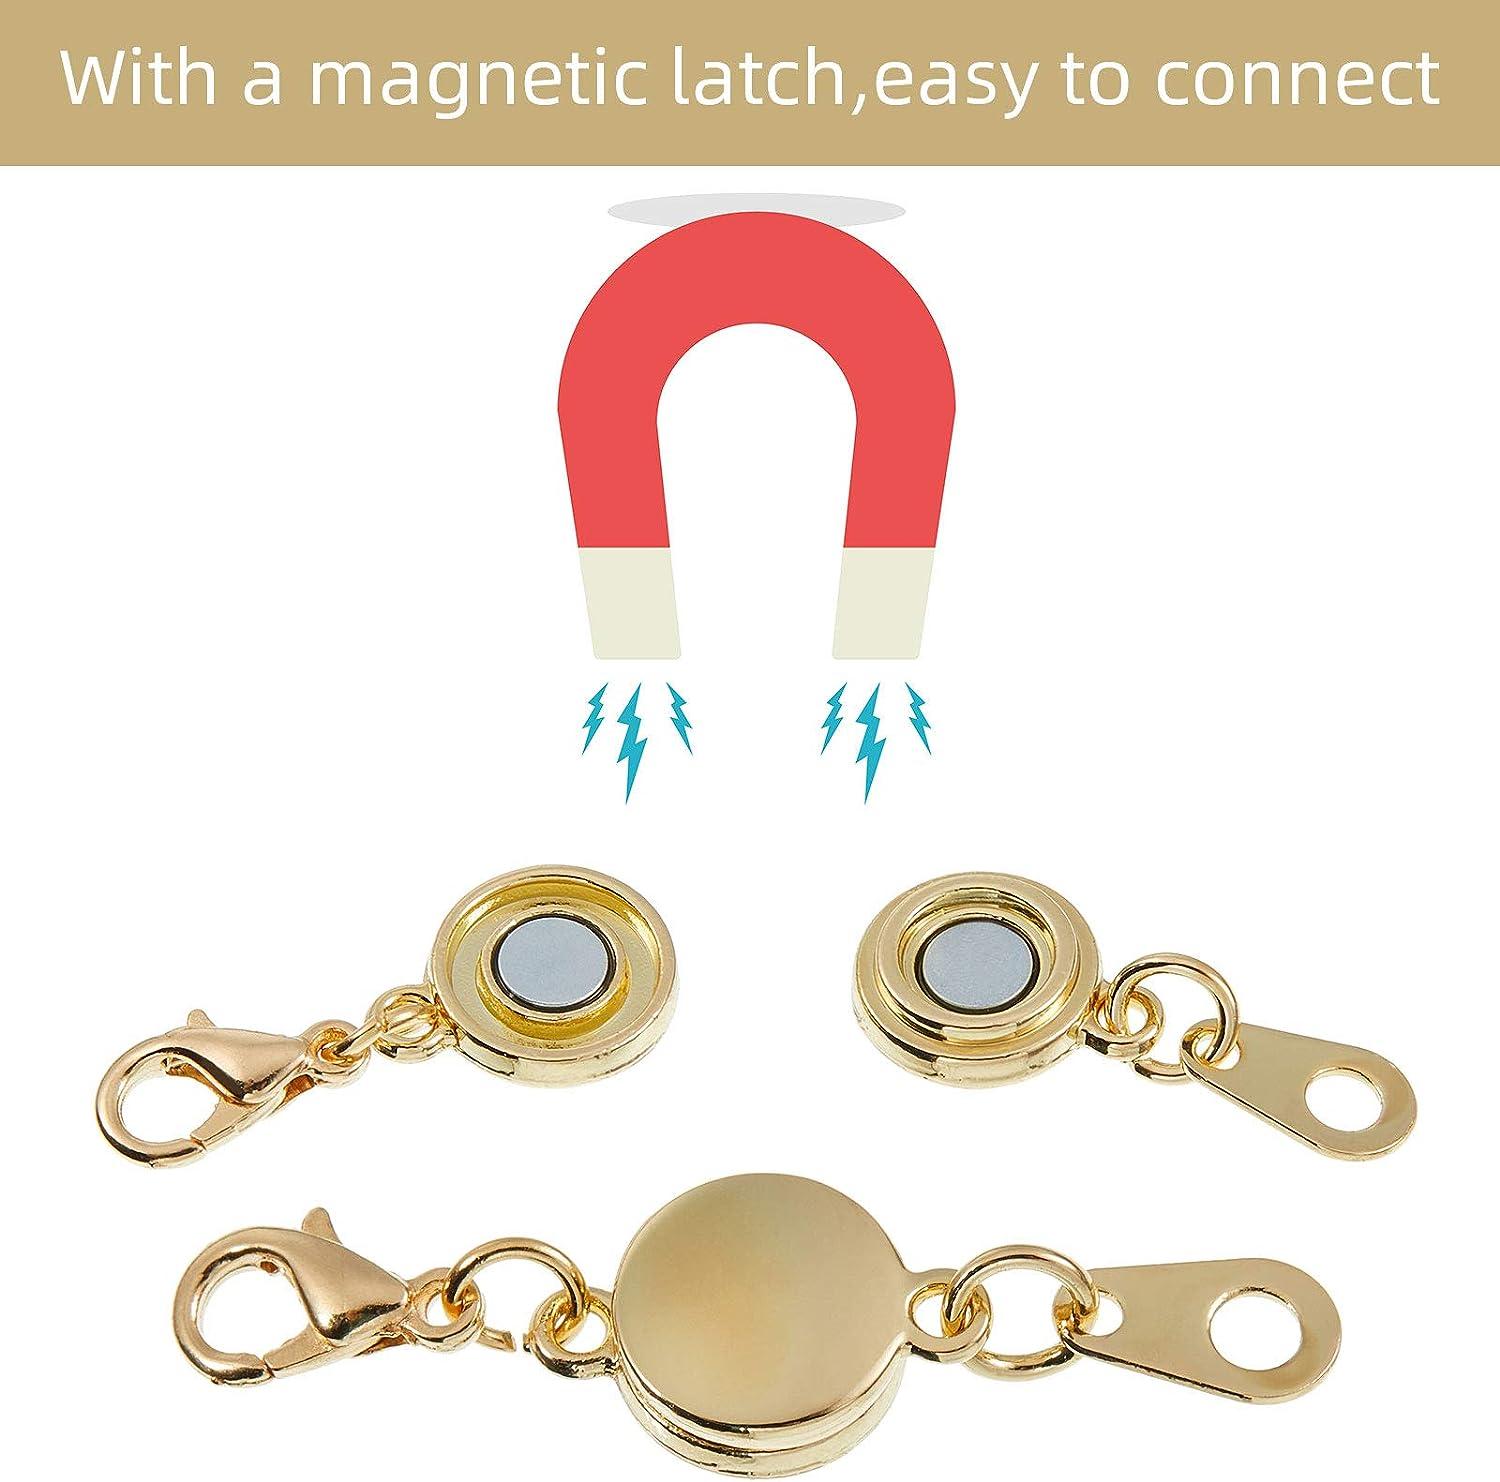 Safety Locking Magnetic Clasps for Necklaces and Bracelets – zpsolution